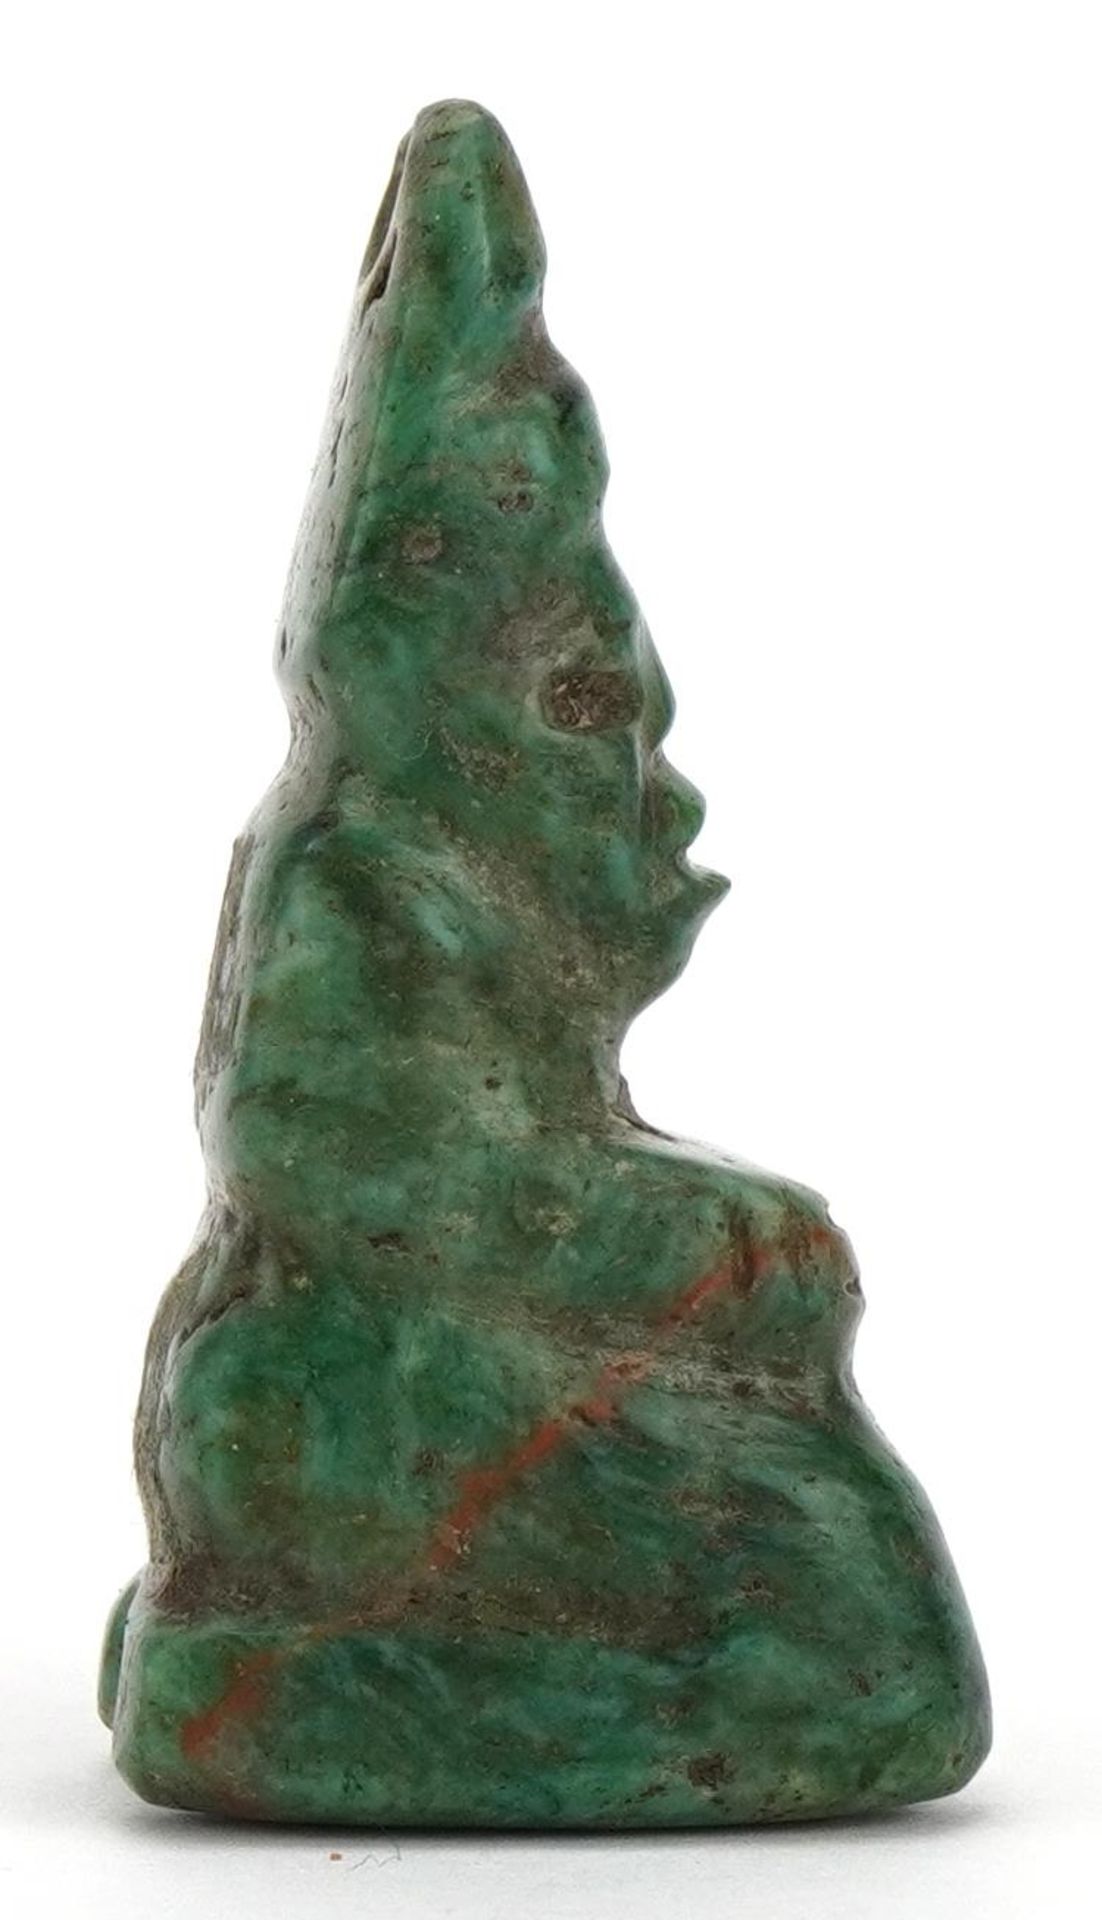 Tribal interest green hardstone figural pendant, probably Mayan or pre Columbian, 4.5cm high : For - Image 3 of 7